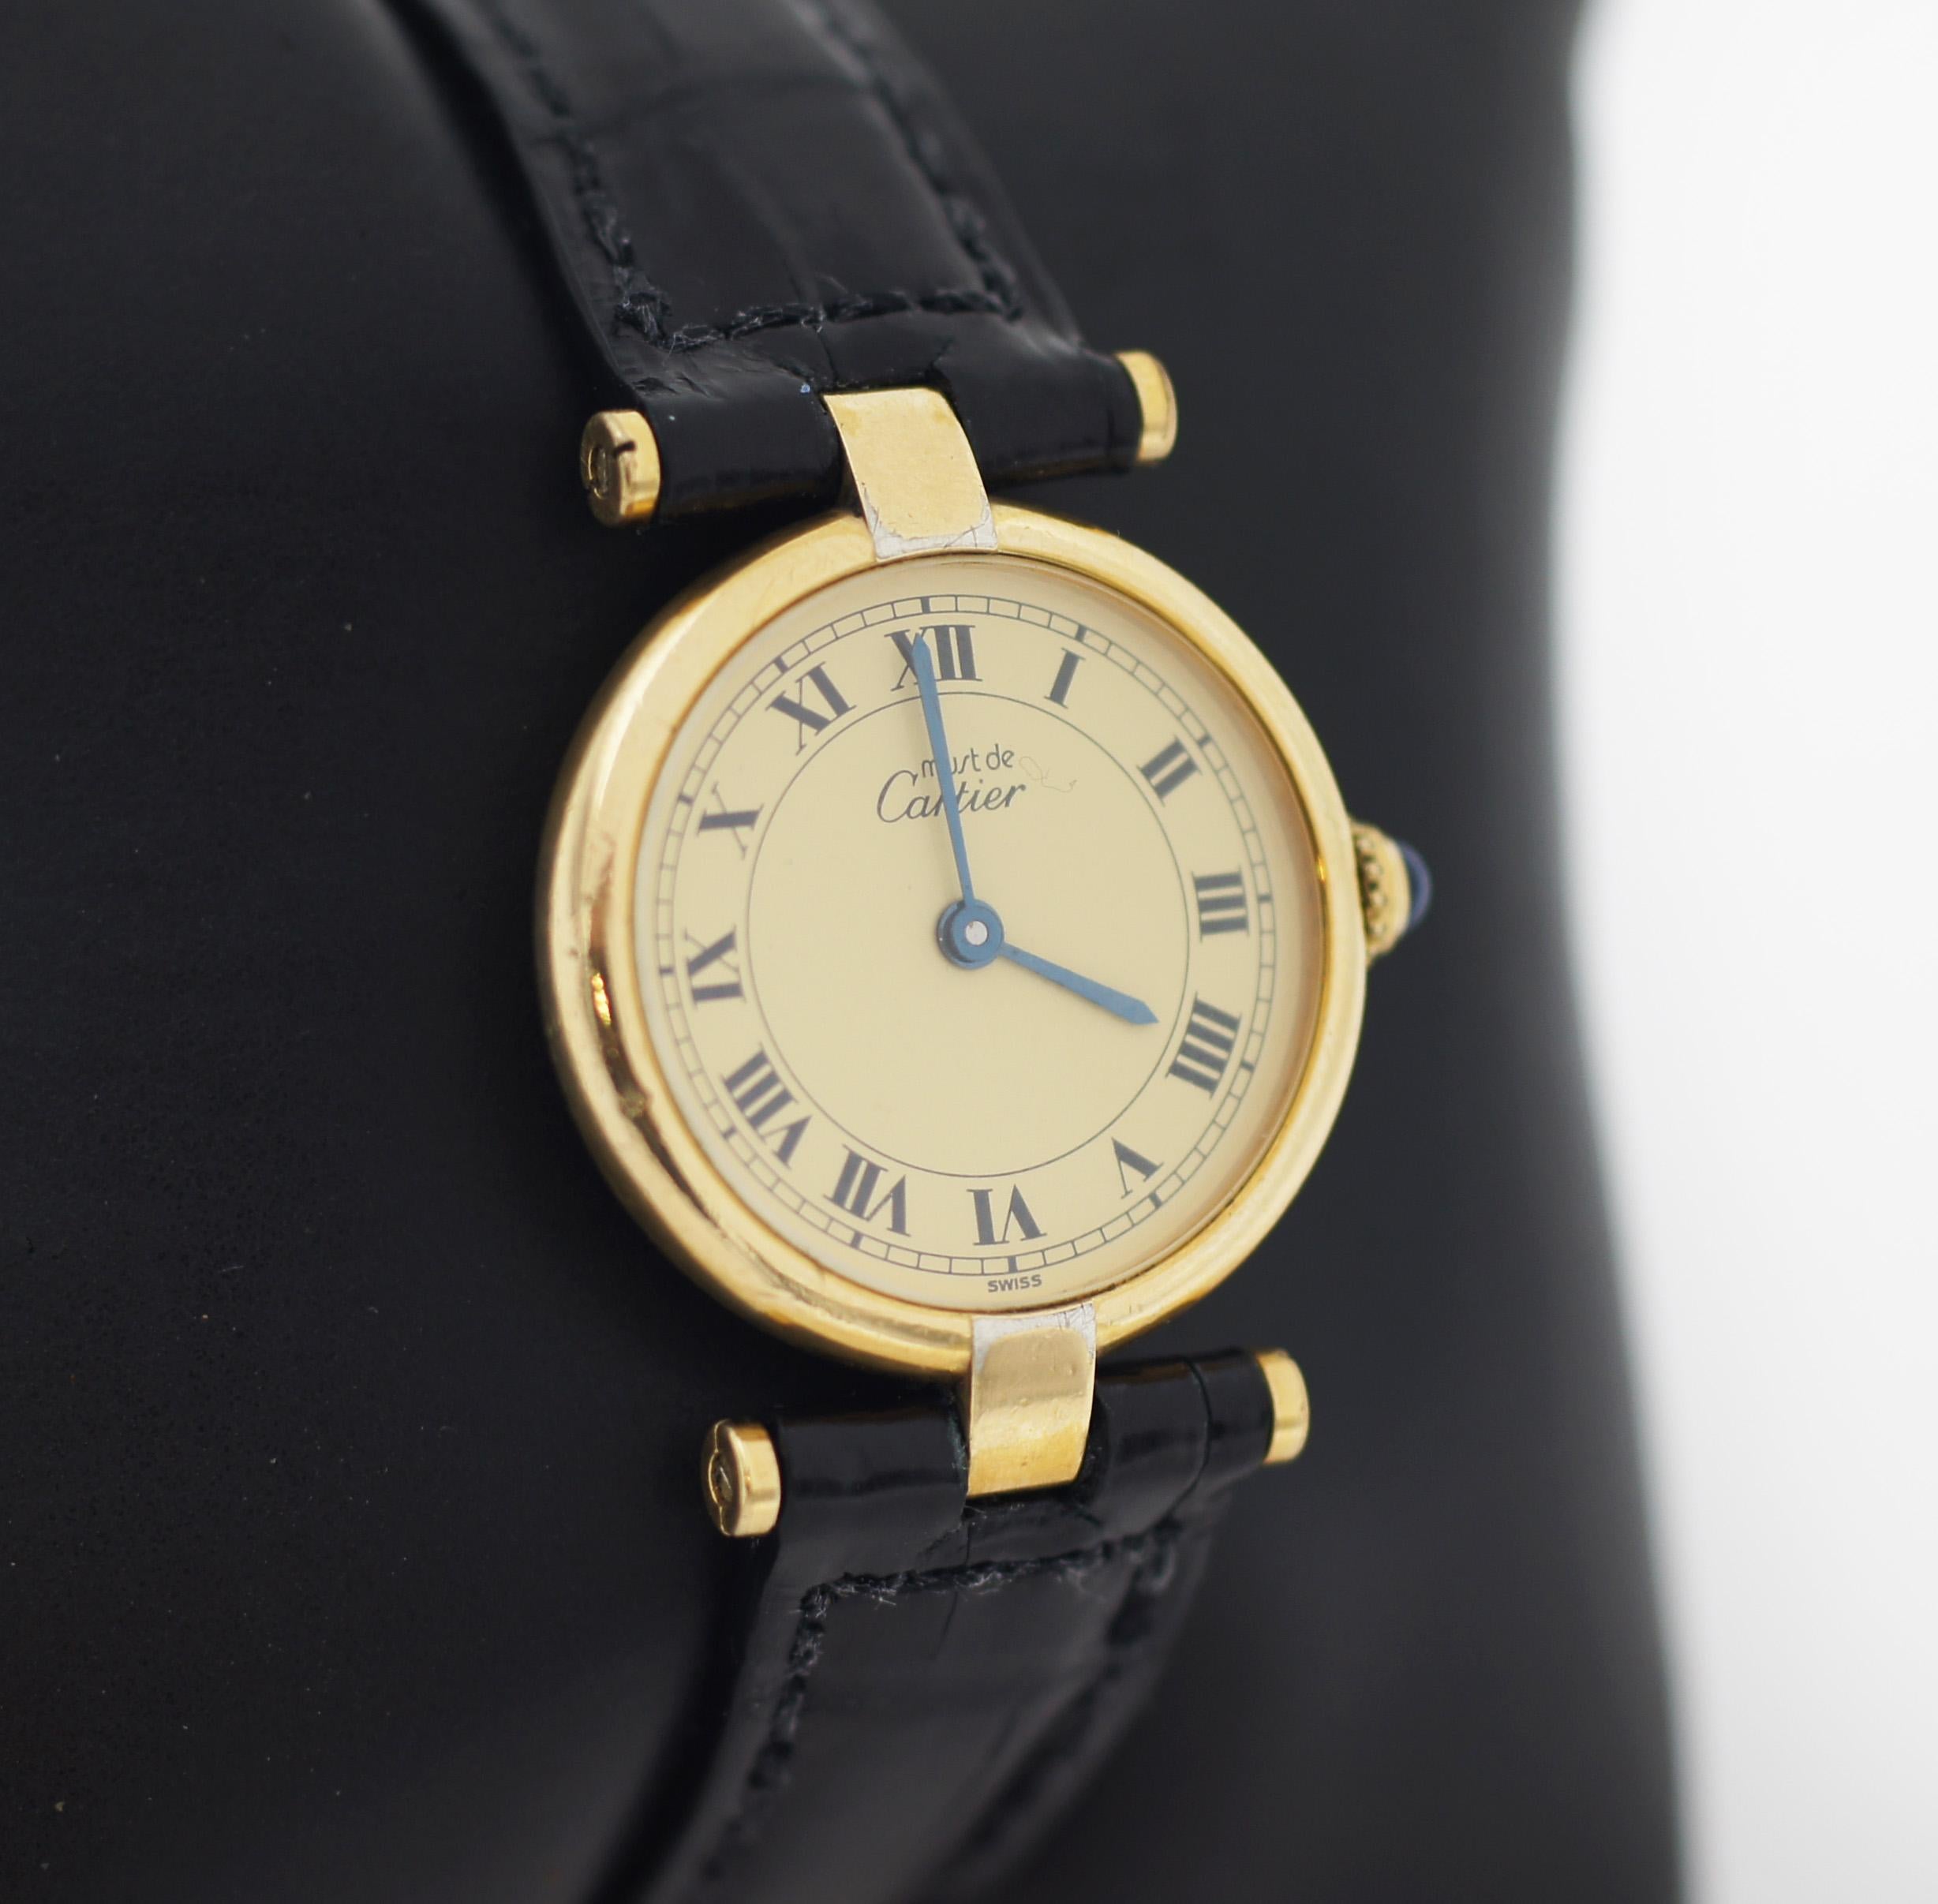 Cartier Must de Cartier watch is crafted in 18K gold plated sterling silver construction (Vermeil) and features a Swiss made quartz movement.
Circa 1990s
Rare vintage original Cartier
Solid 925 silver yellow gold plated
Size 24mm excluding